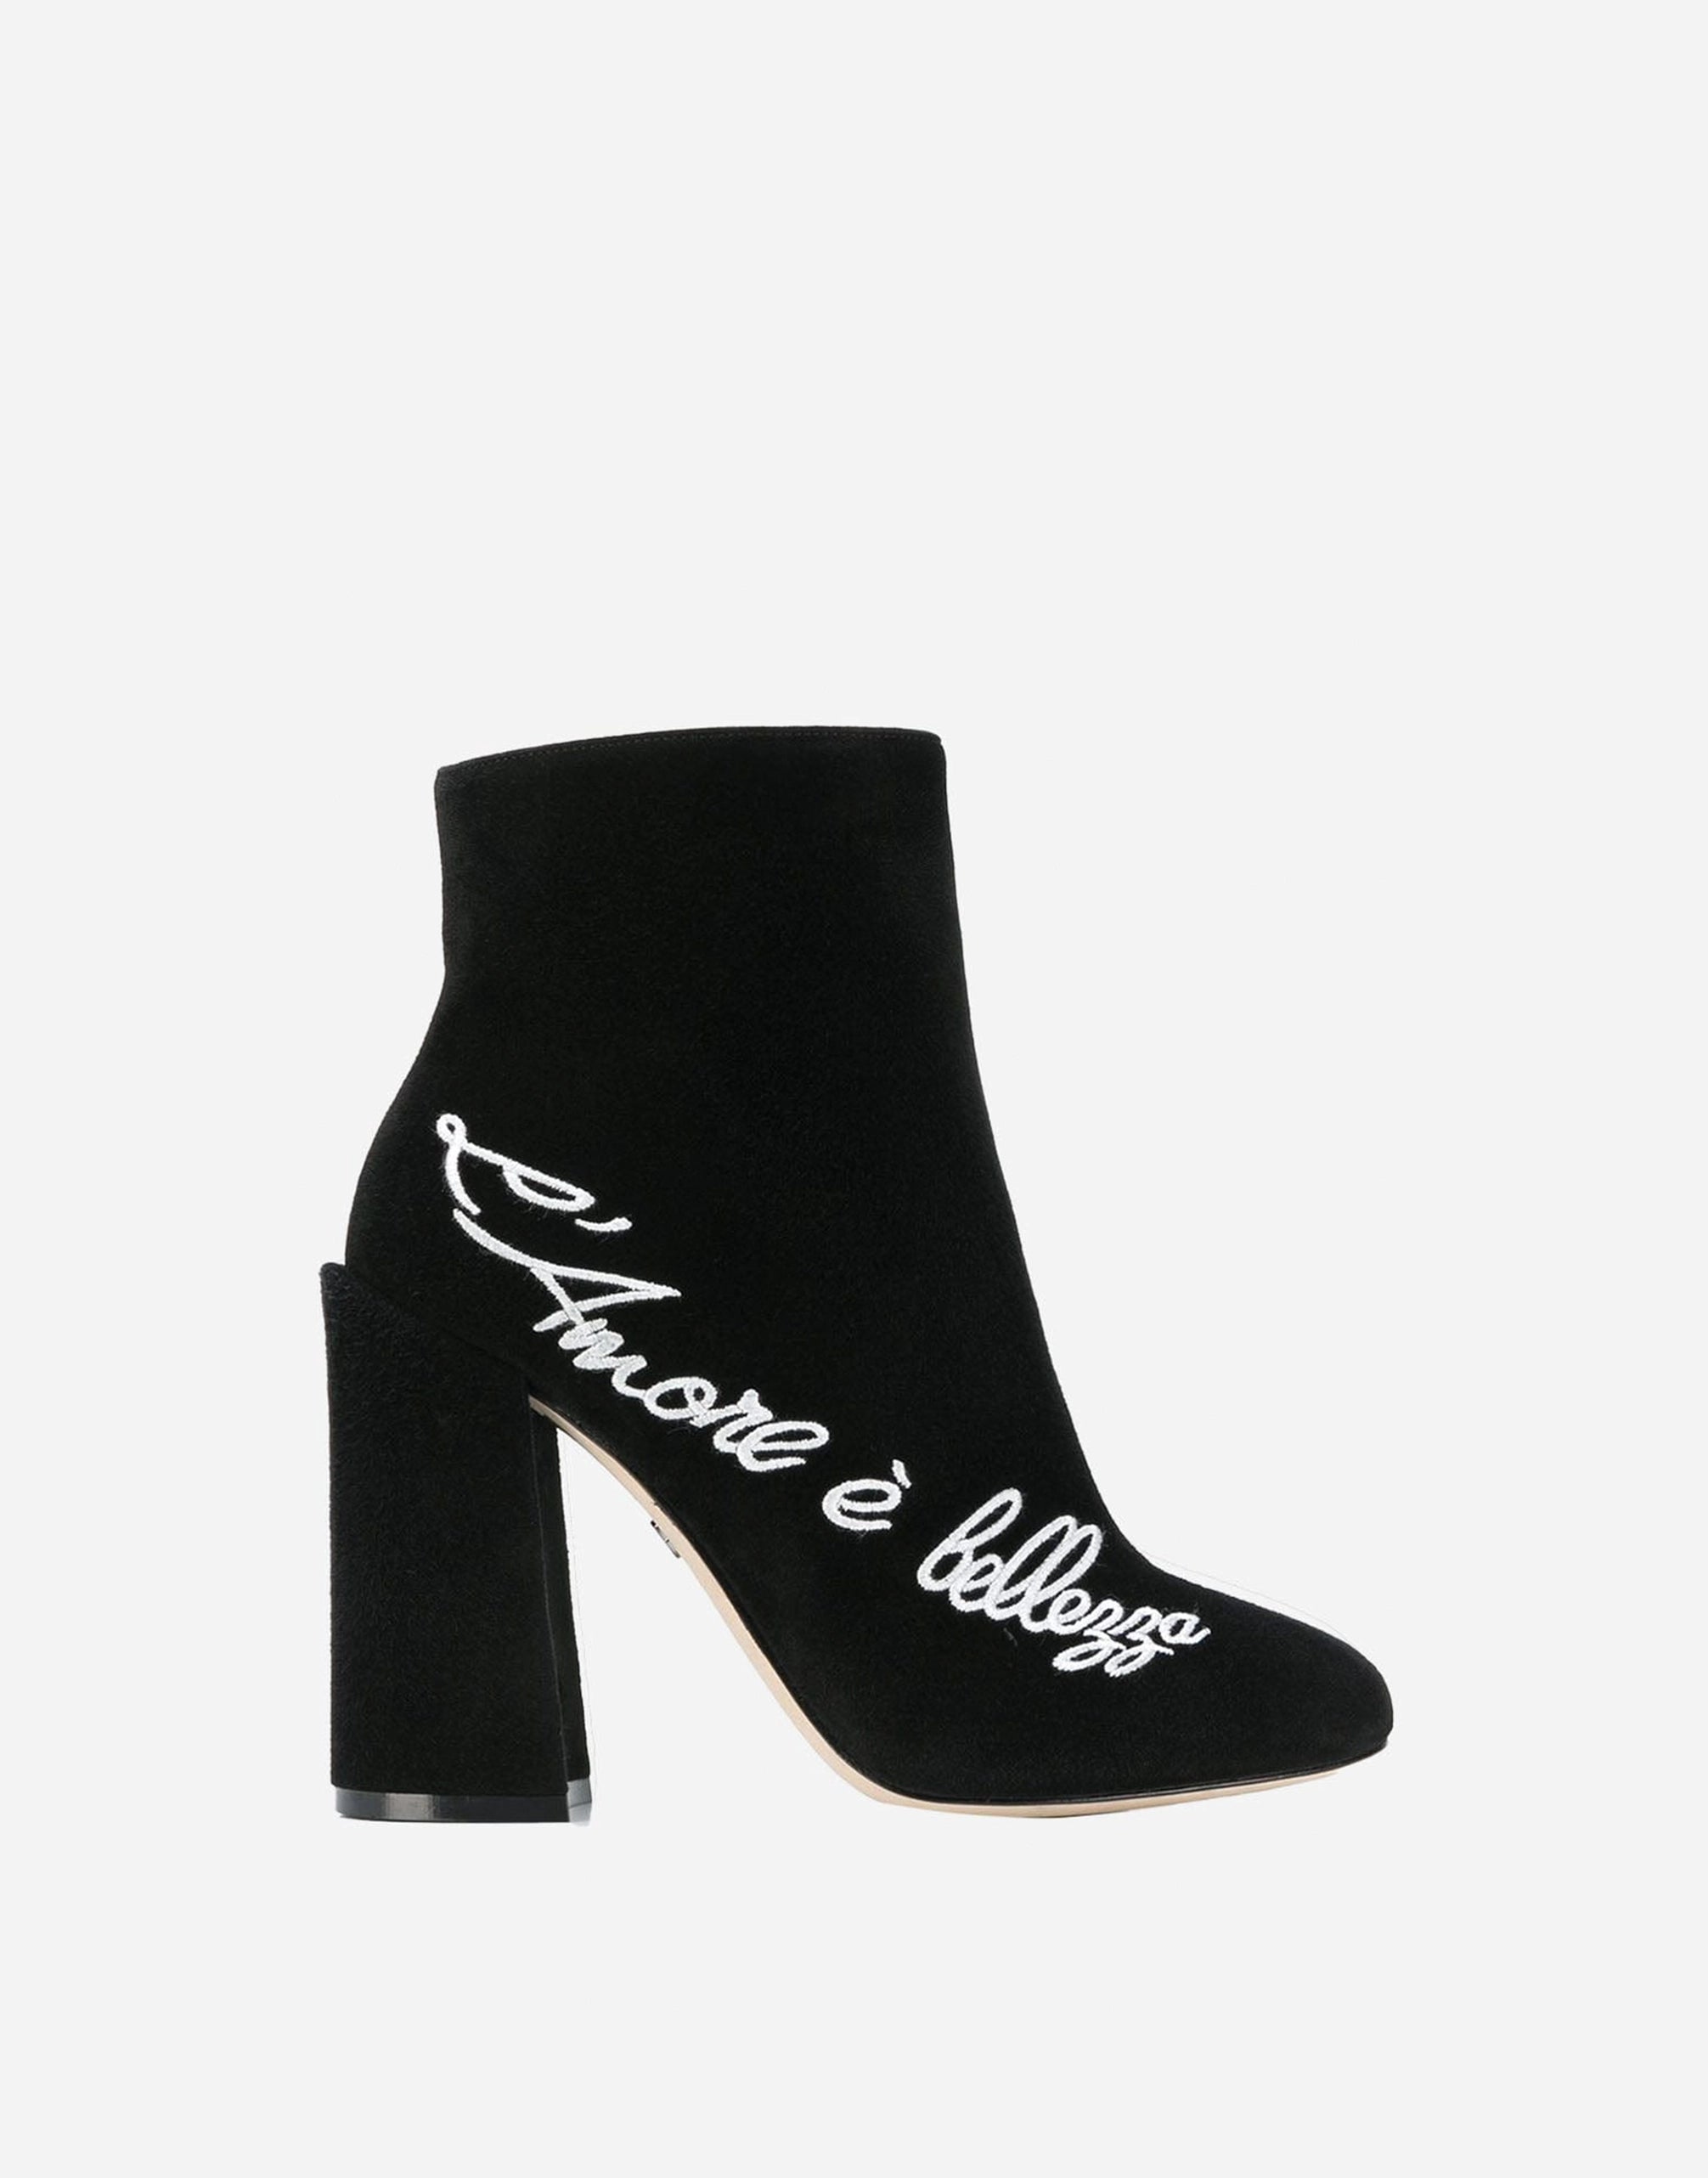 Dolce & Gabbana Amore Suede Ankle Boots